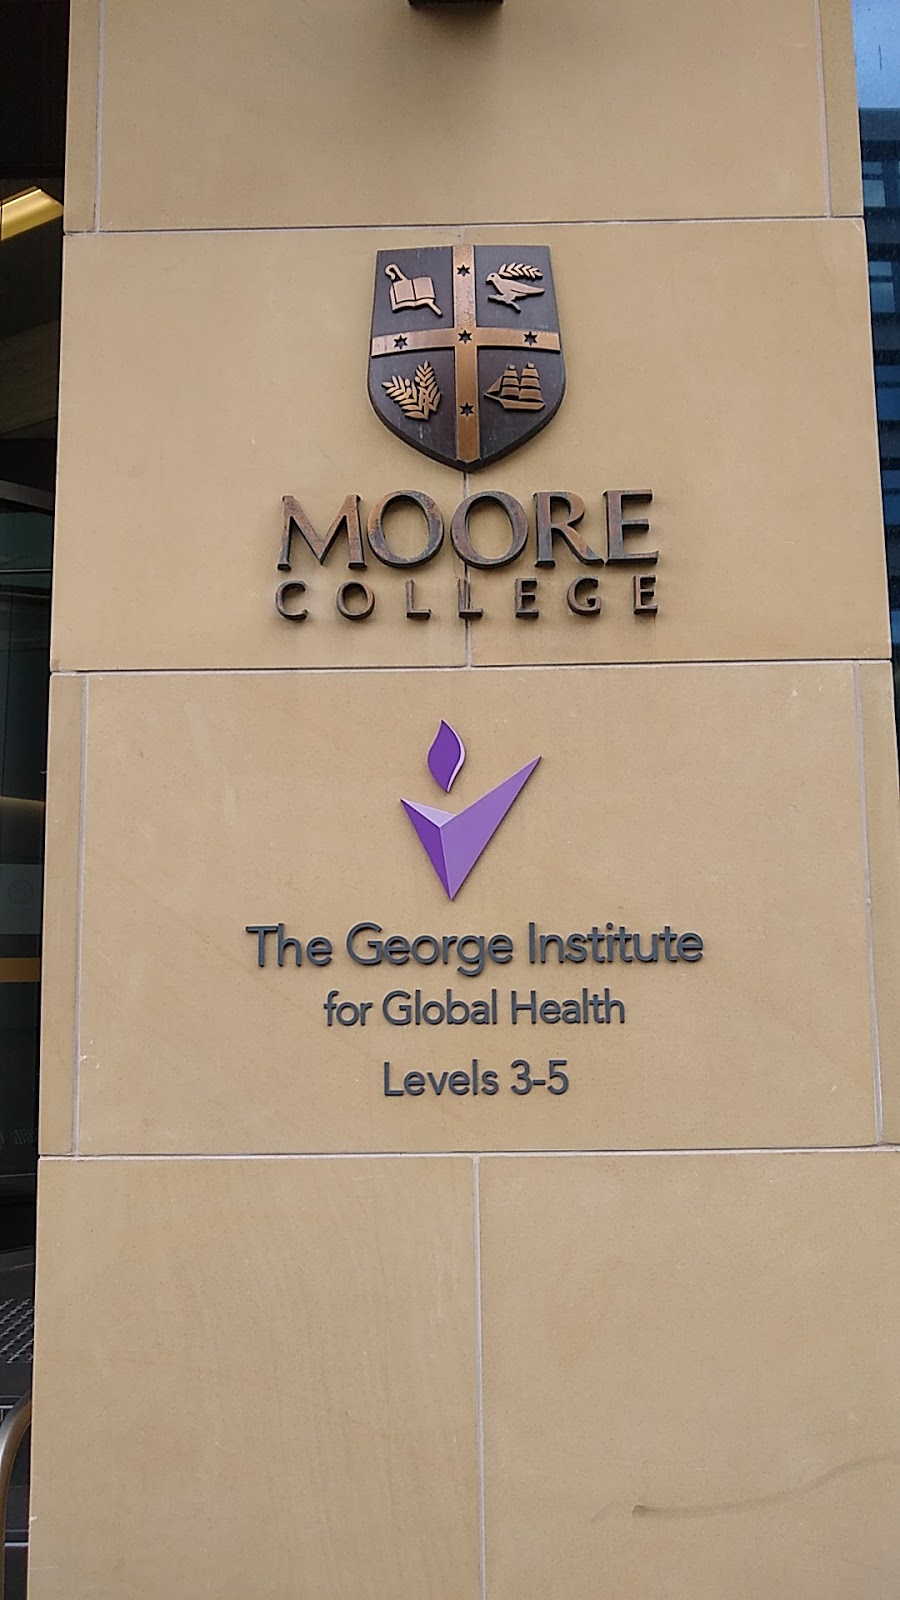 Moore Theological College | university | 1 King St, Newtown NSW 2042, Australia | 0295779999 OR +61 2 9577 9999